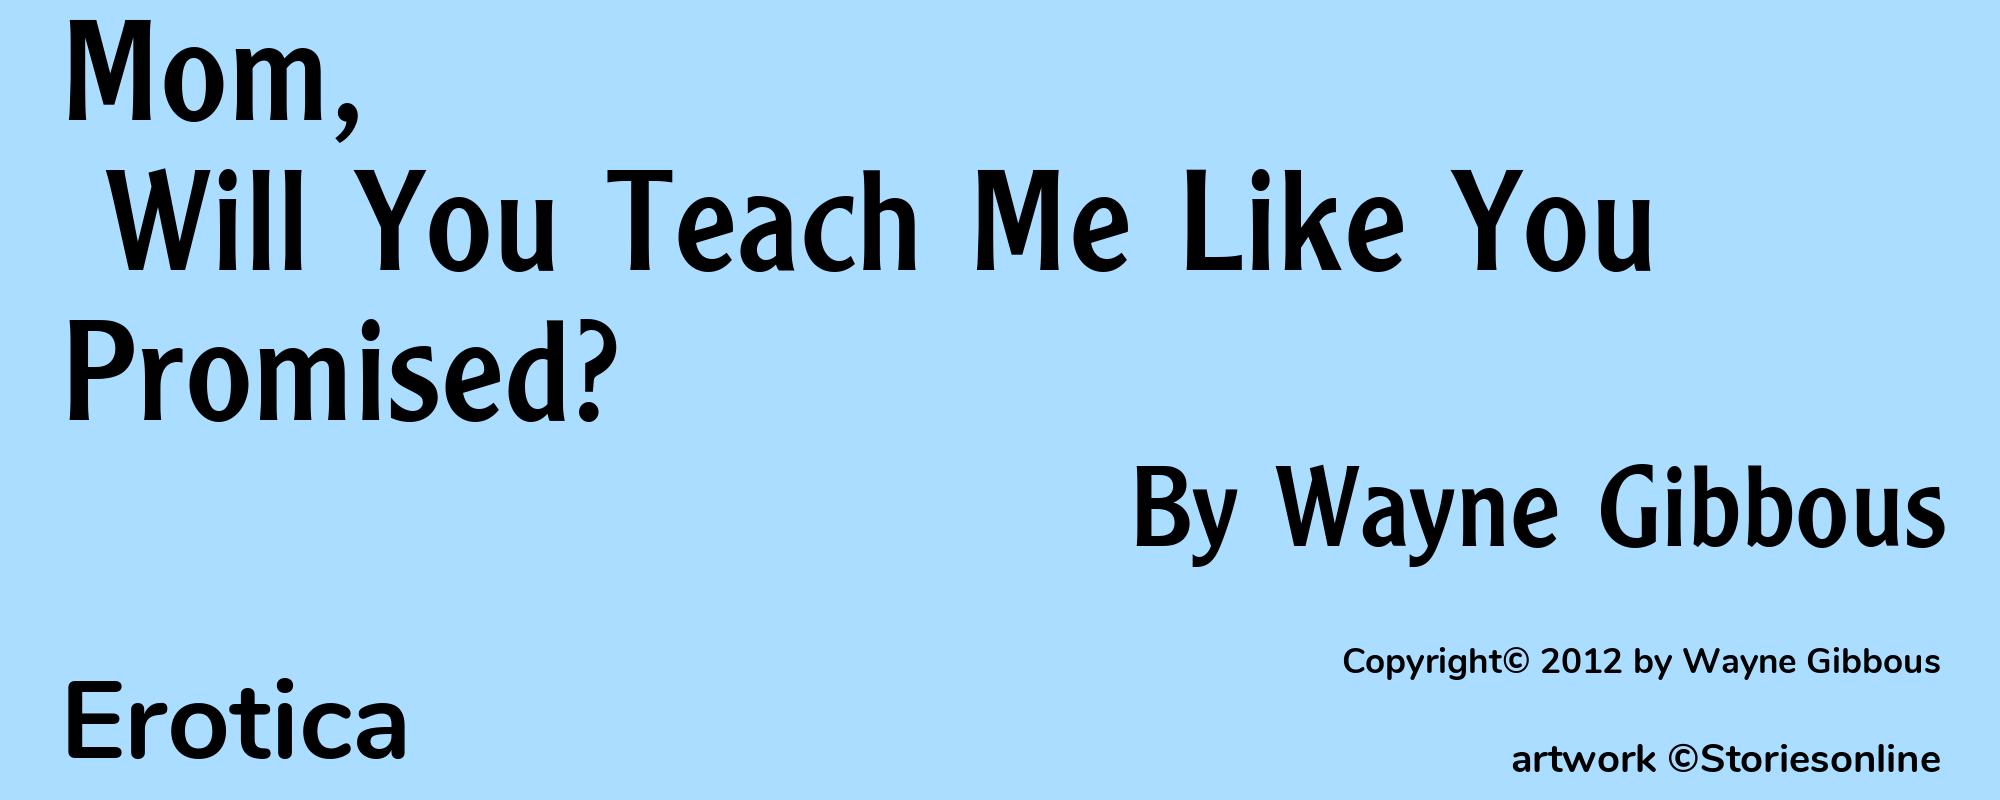 Mom, Will You Teach Me Like You Promised? - Cover